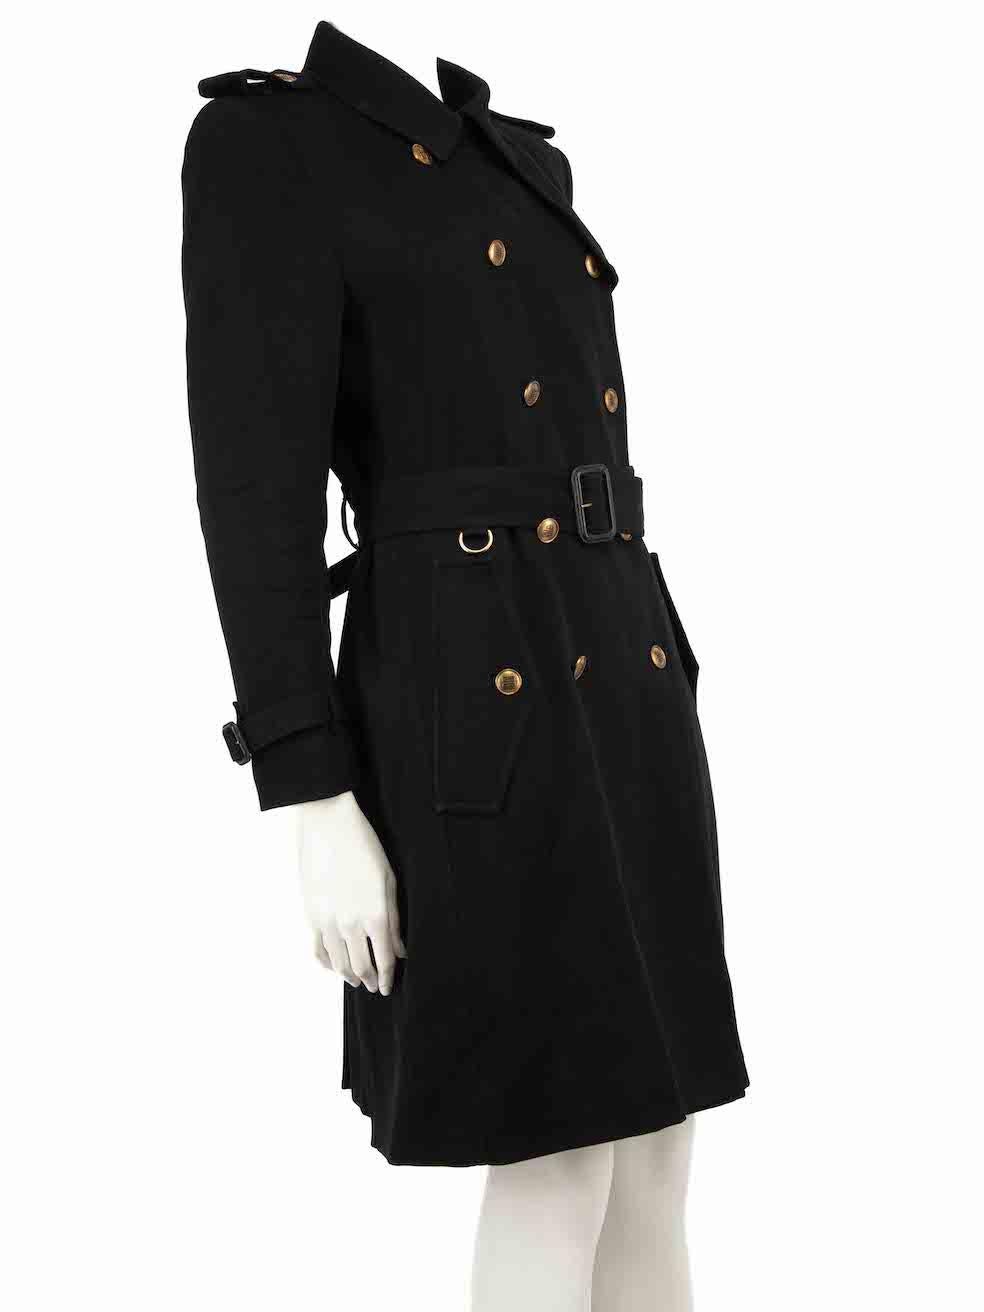 CONDITION is Very good. Minimal wear to coat is evident. Minimal wear to the right-side bust lining with light plucks to the weave on this used Givenchy designer resale item.
 
 
 
 Details
 
 
 Black
 
 Wool
 
 Coat
 
 Double breasted
 
 Gold